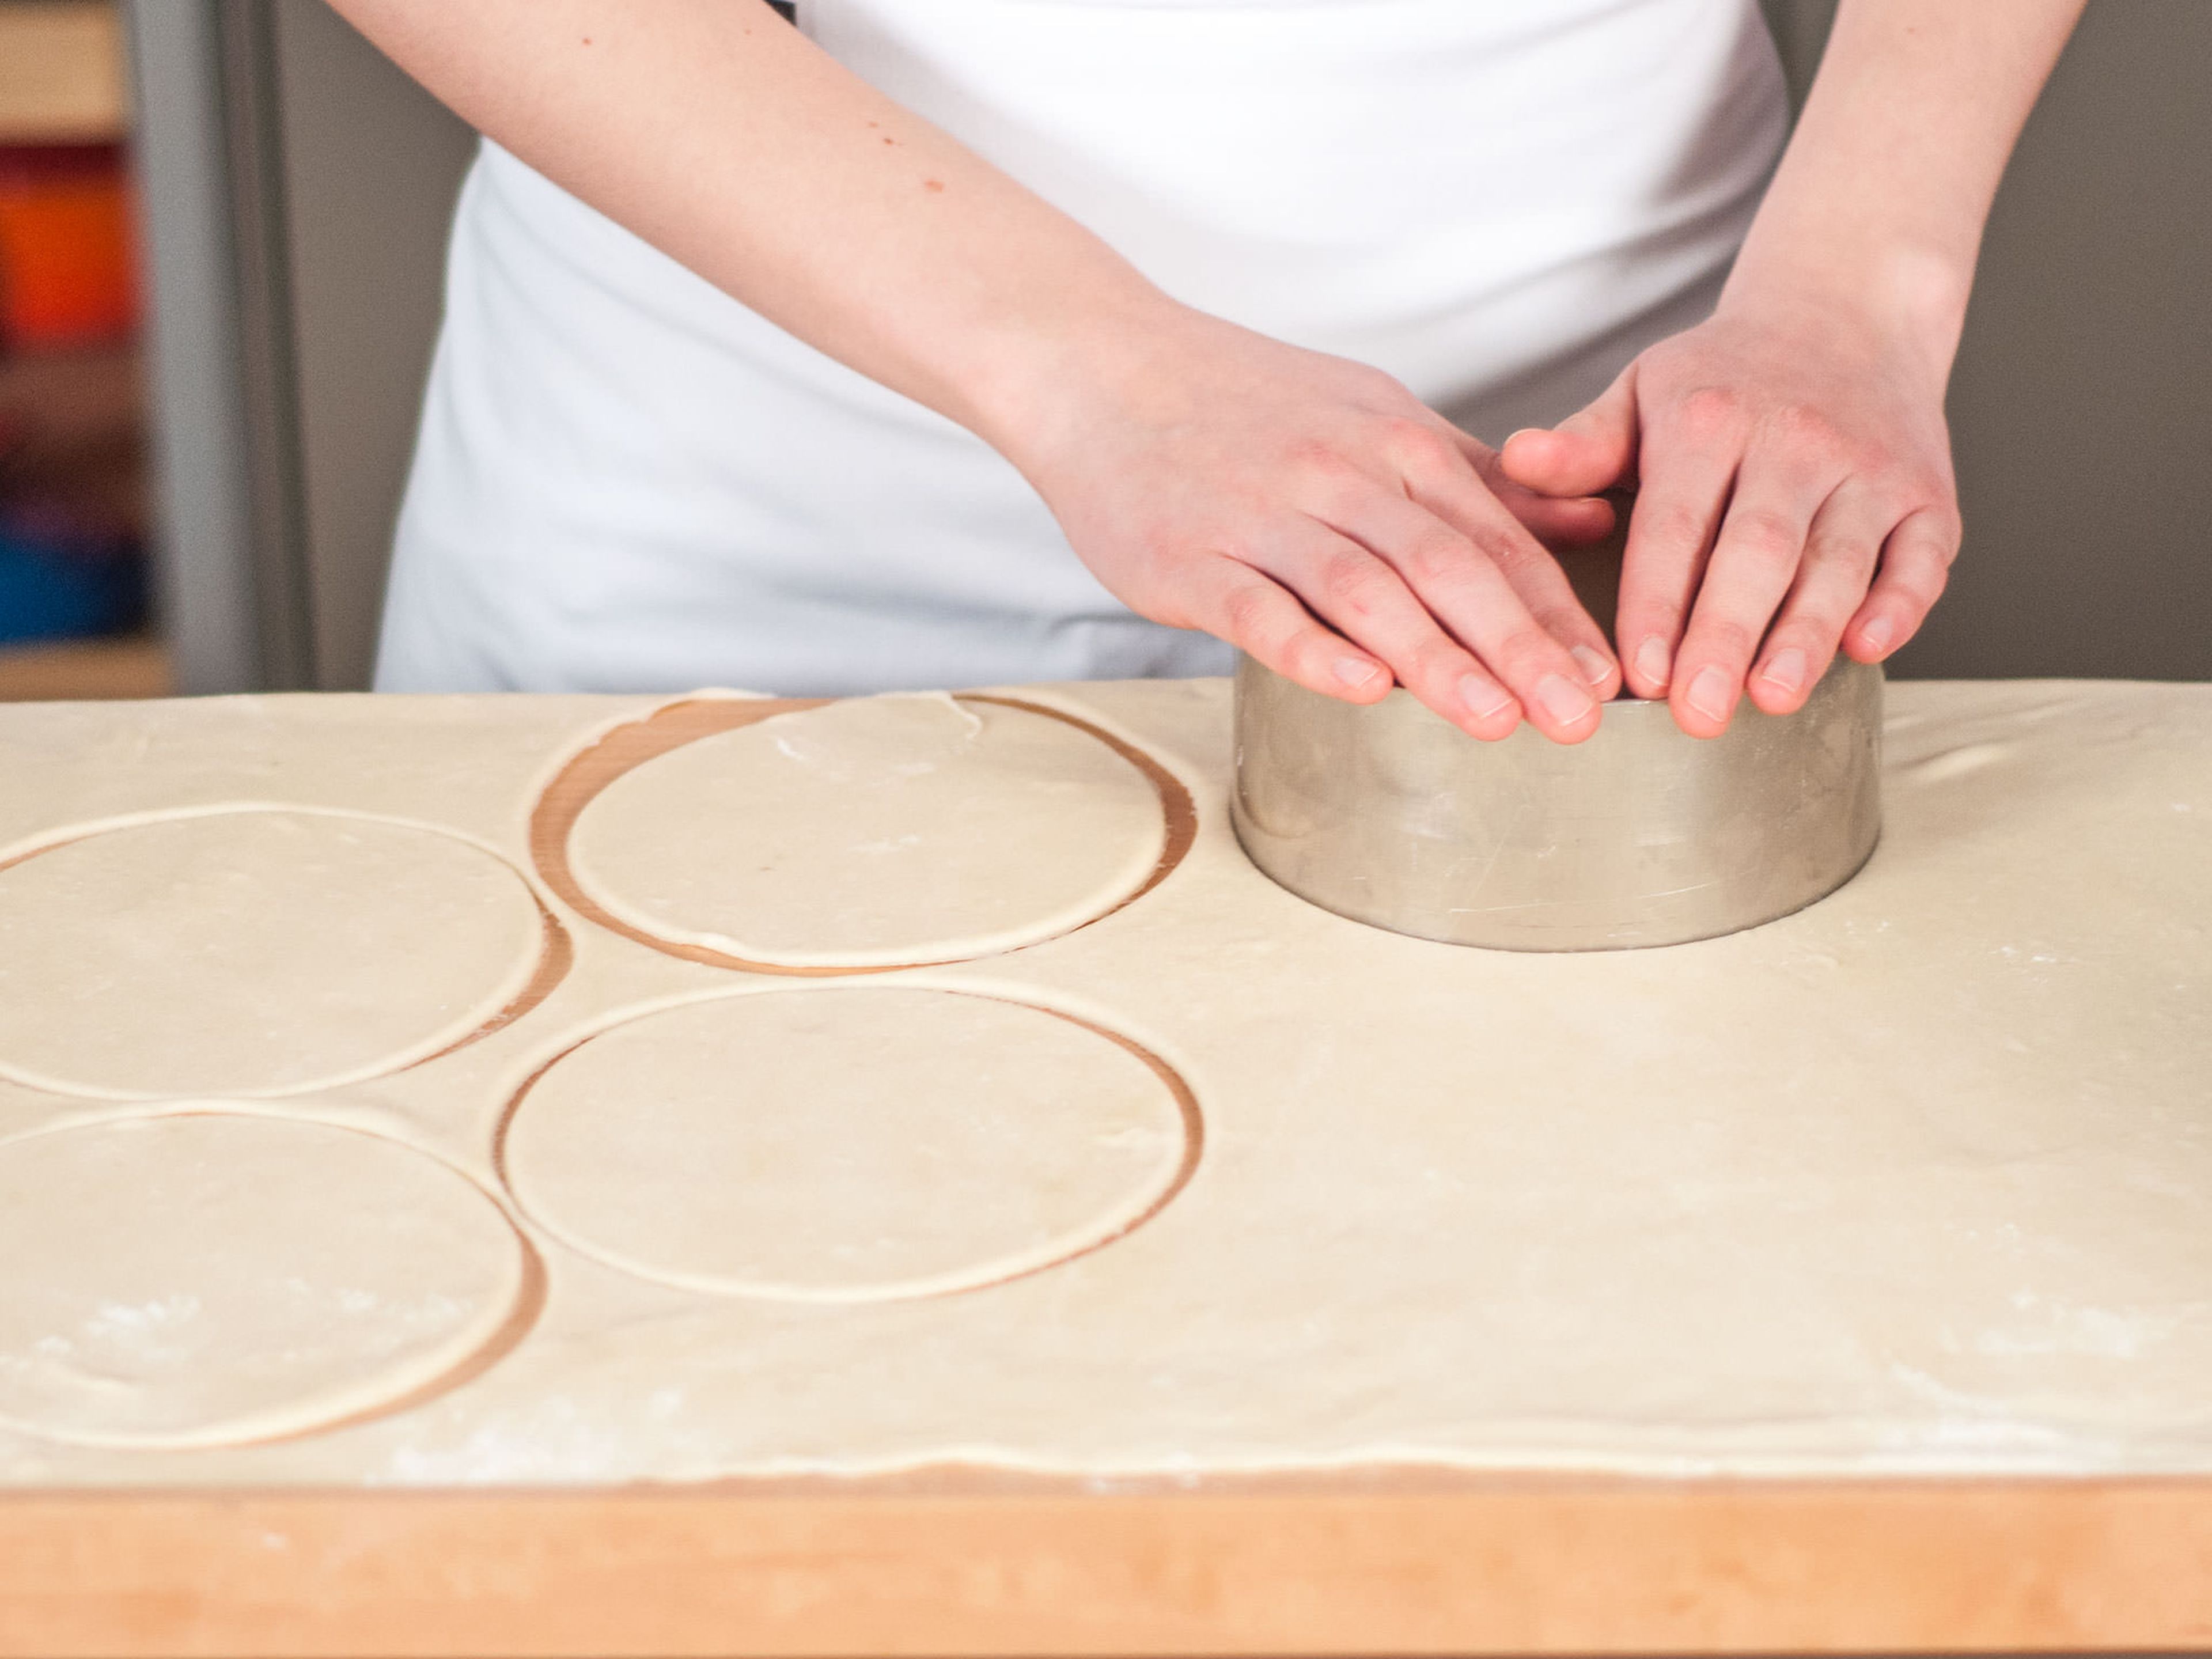 Preheat oven to 180°C/350°F. Lightly flour work surface. Roll dough into a thin layer with a rolling pin. Using a dough cutter, cut out rounds.